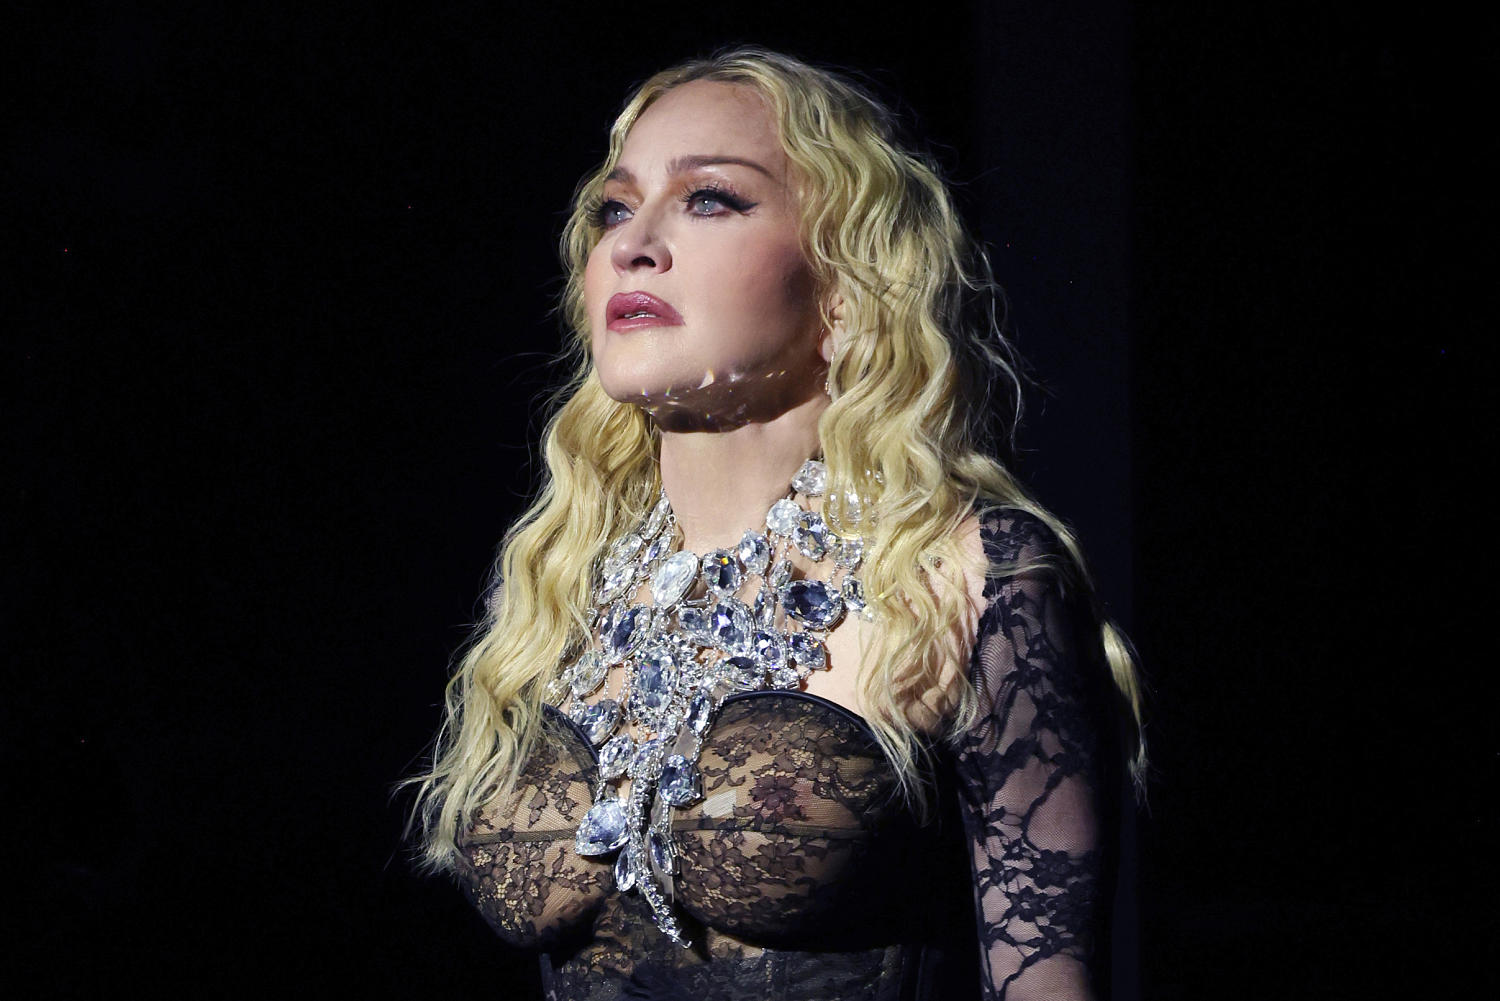 Madonna calls out fan for sitting during concert before realizing they were in wheelchair